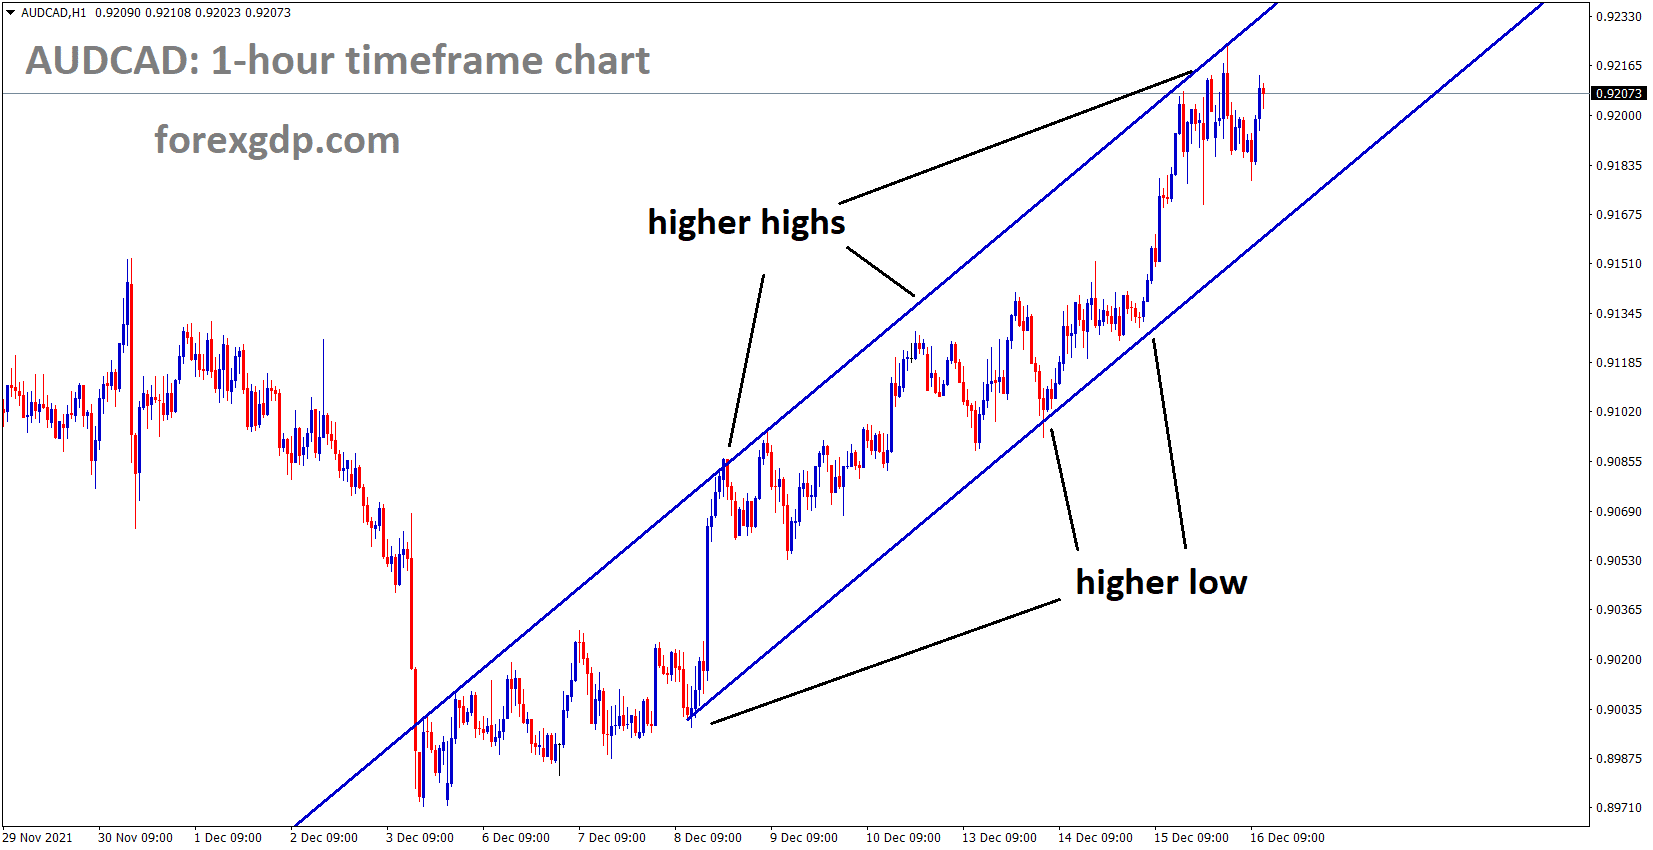 AUDCAD is moving in an Ascending channel and market consolidation at the higher high area of the Channel